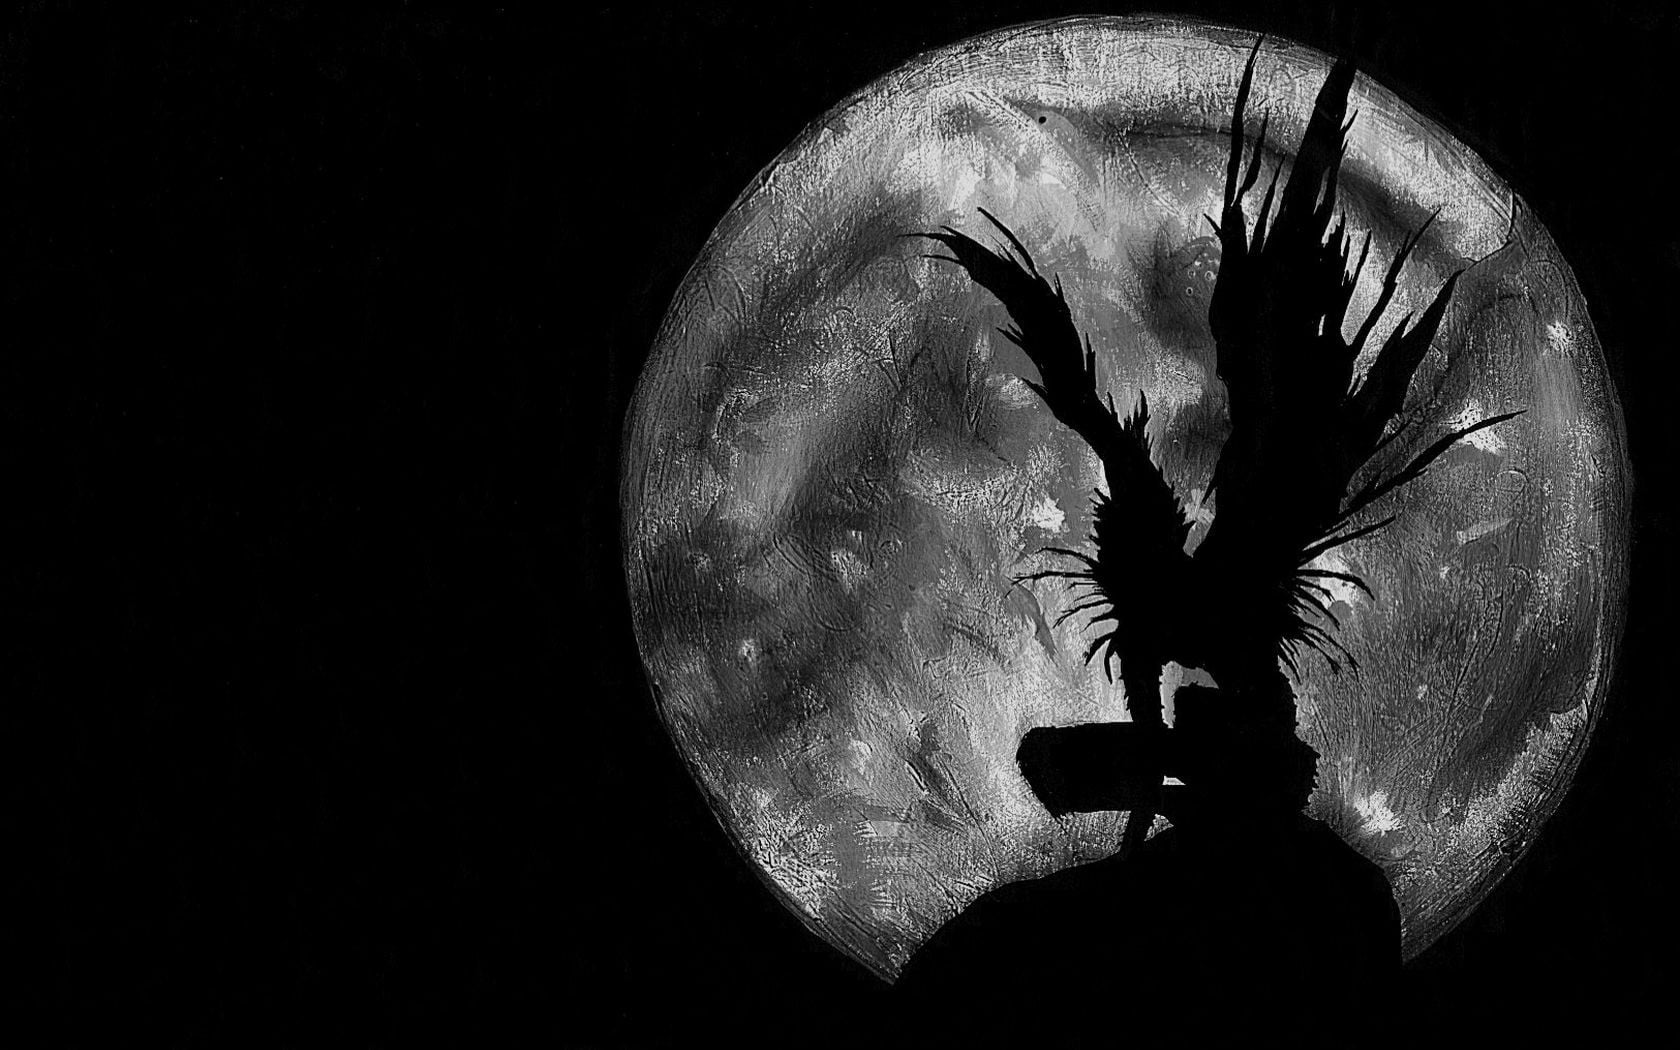 Death Note Ryuk wallpaper, Moon, human body part, one person